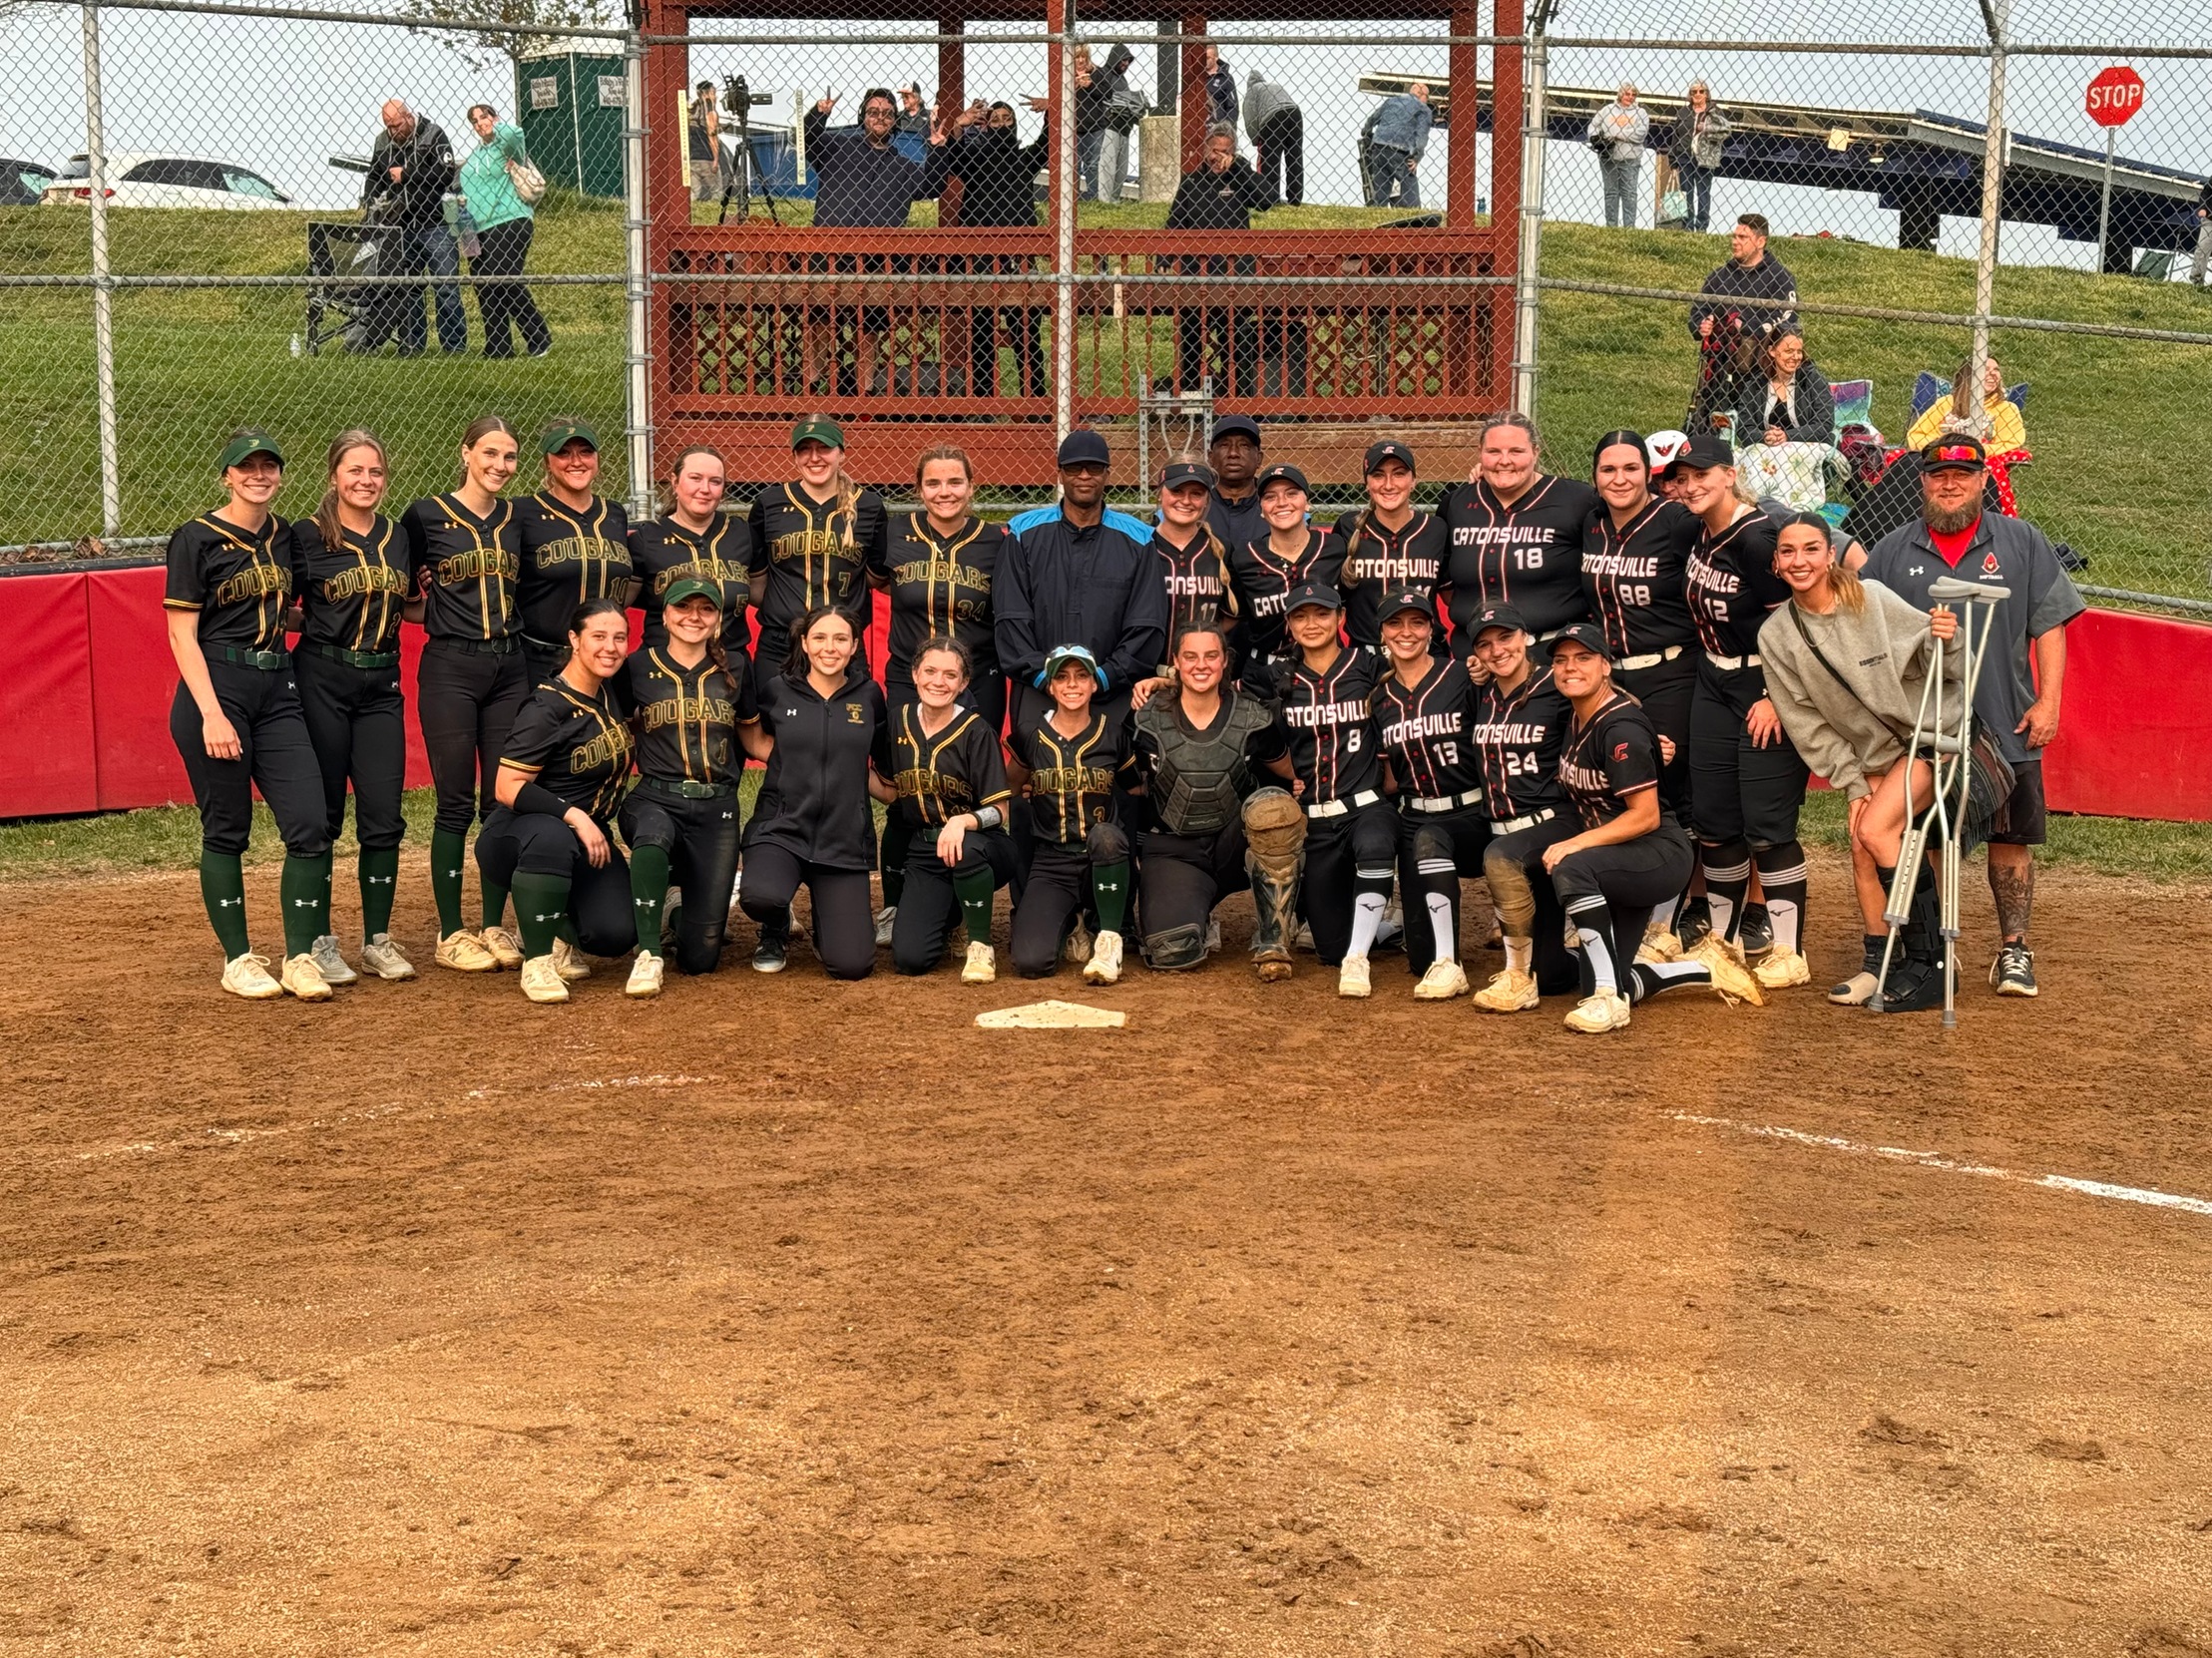 CATONSVILLE SOFTBALL SWEEPS DOUBLEHEADER FROM FREDERICK AND HONORS FIRST RESPONDER